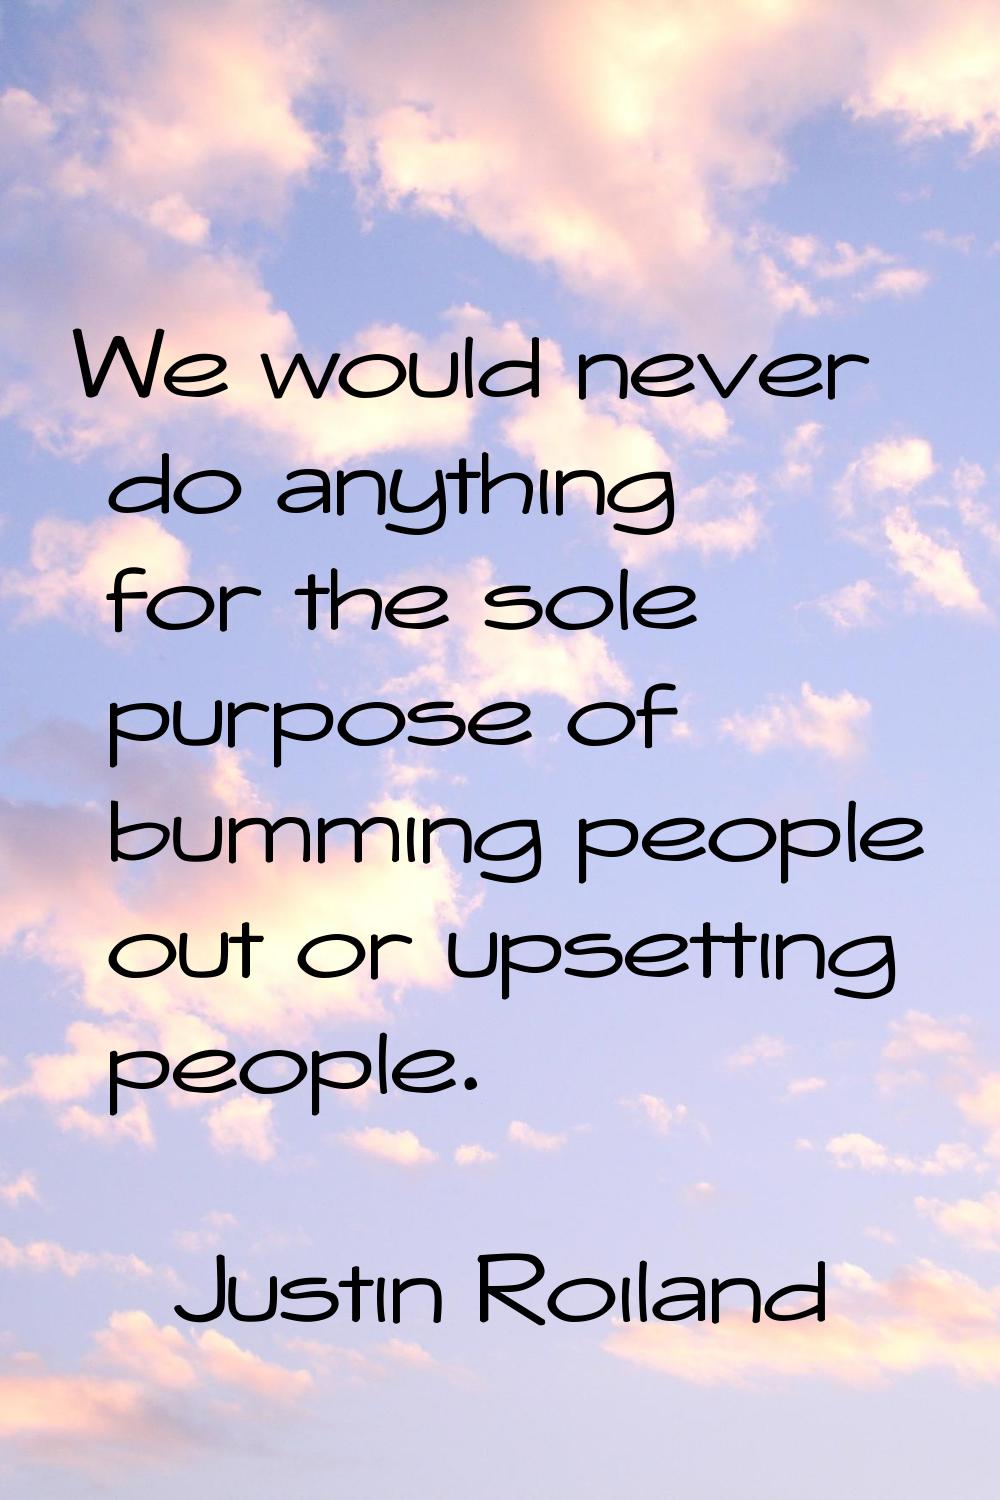 We would never do anything for the sole purpose of bumming people out or upsetting people.